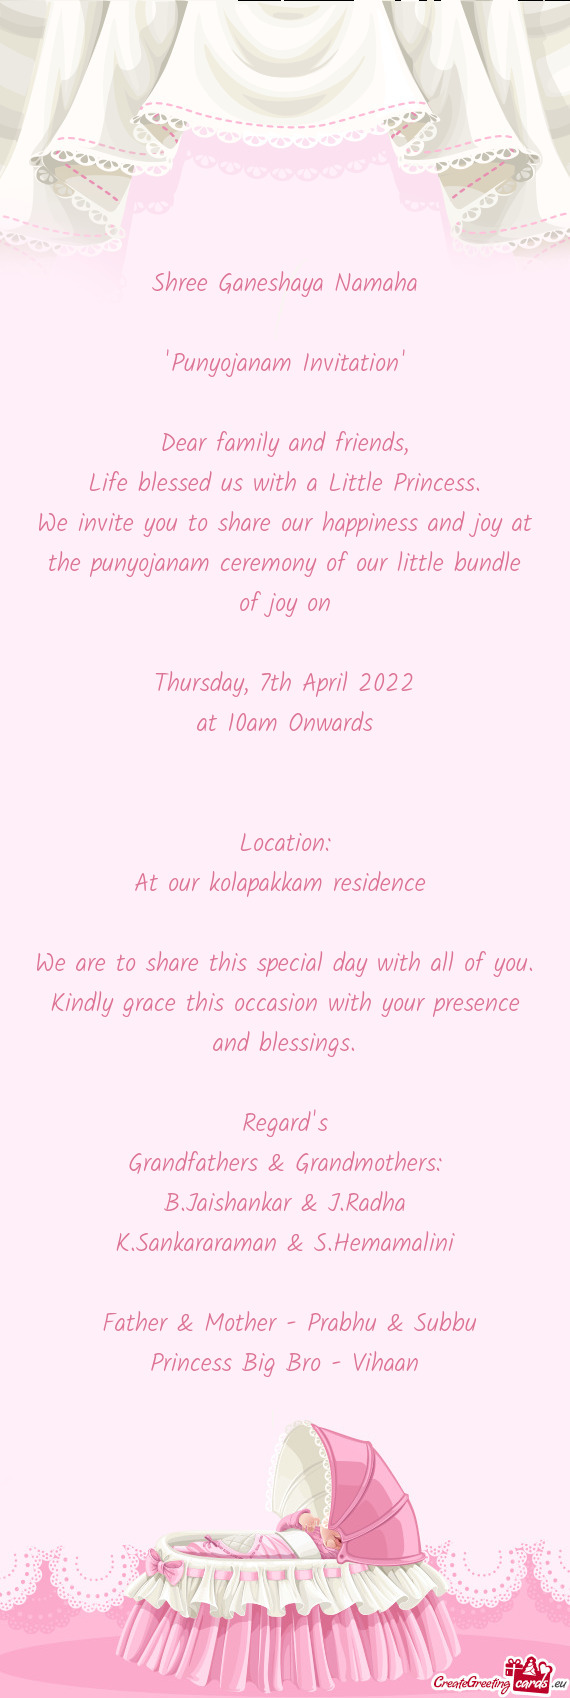 We invite you to share our happiness and joy at the punyojanam ceremony of our little bundle of joy